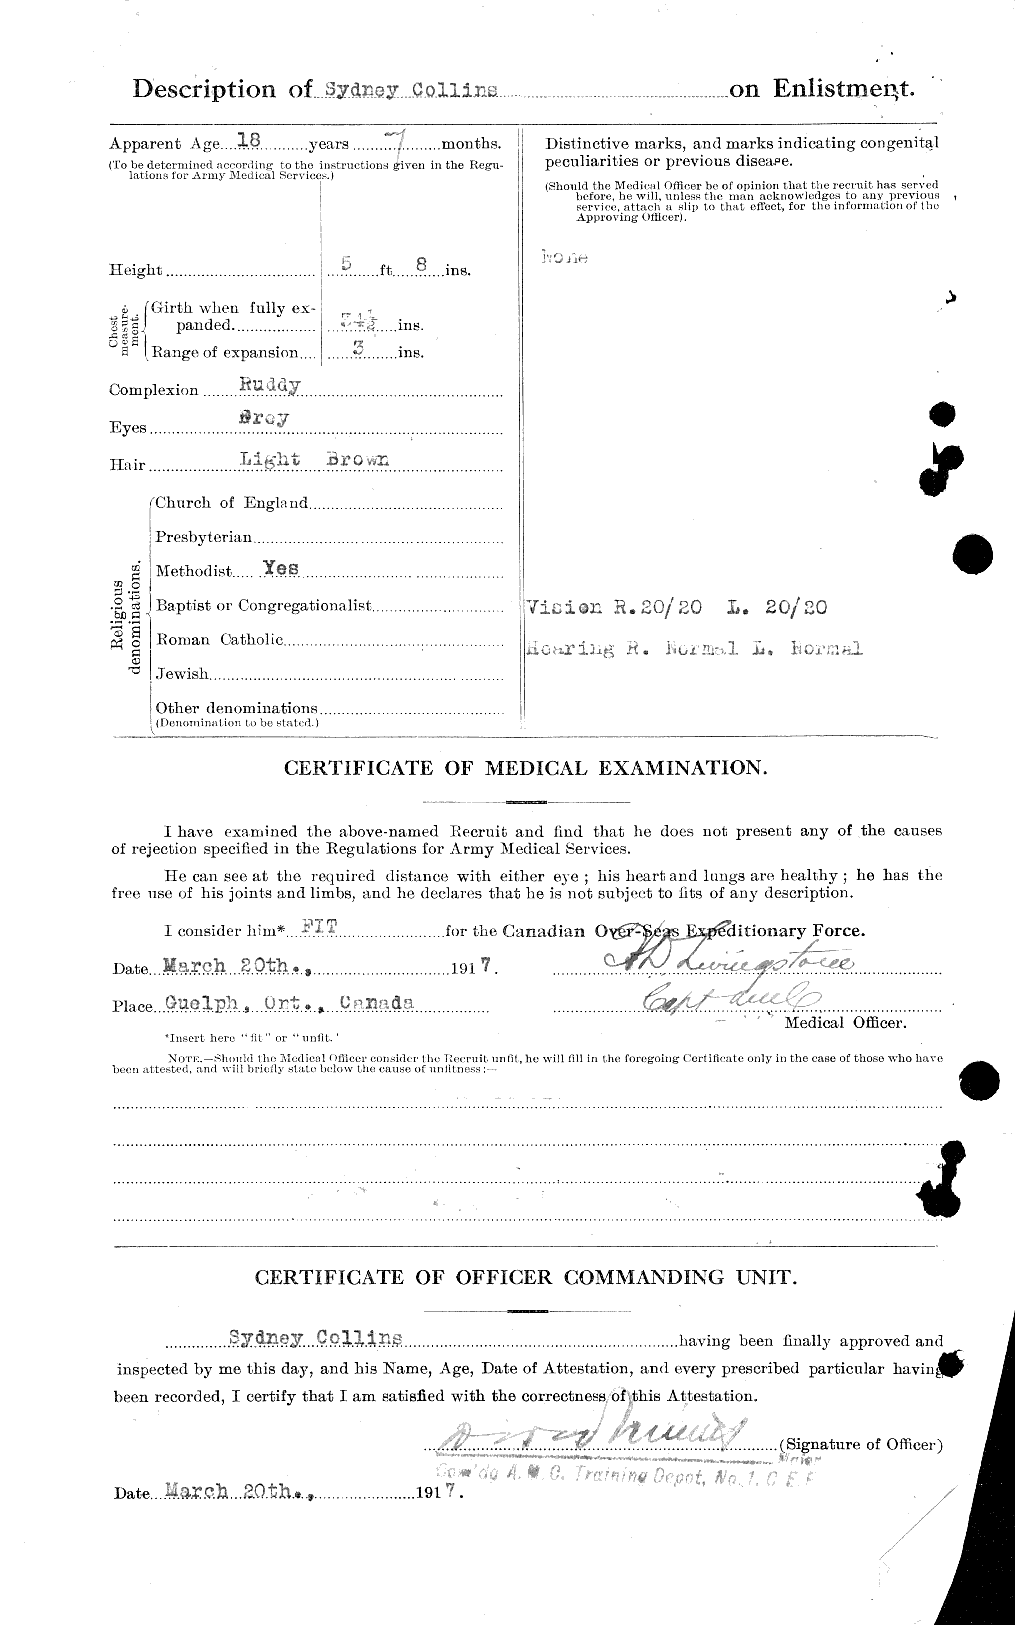 Personnel Records of the First World War - CEF 034544b